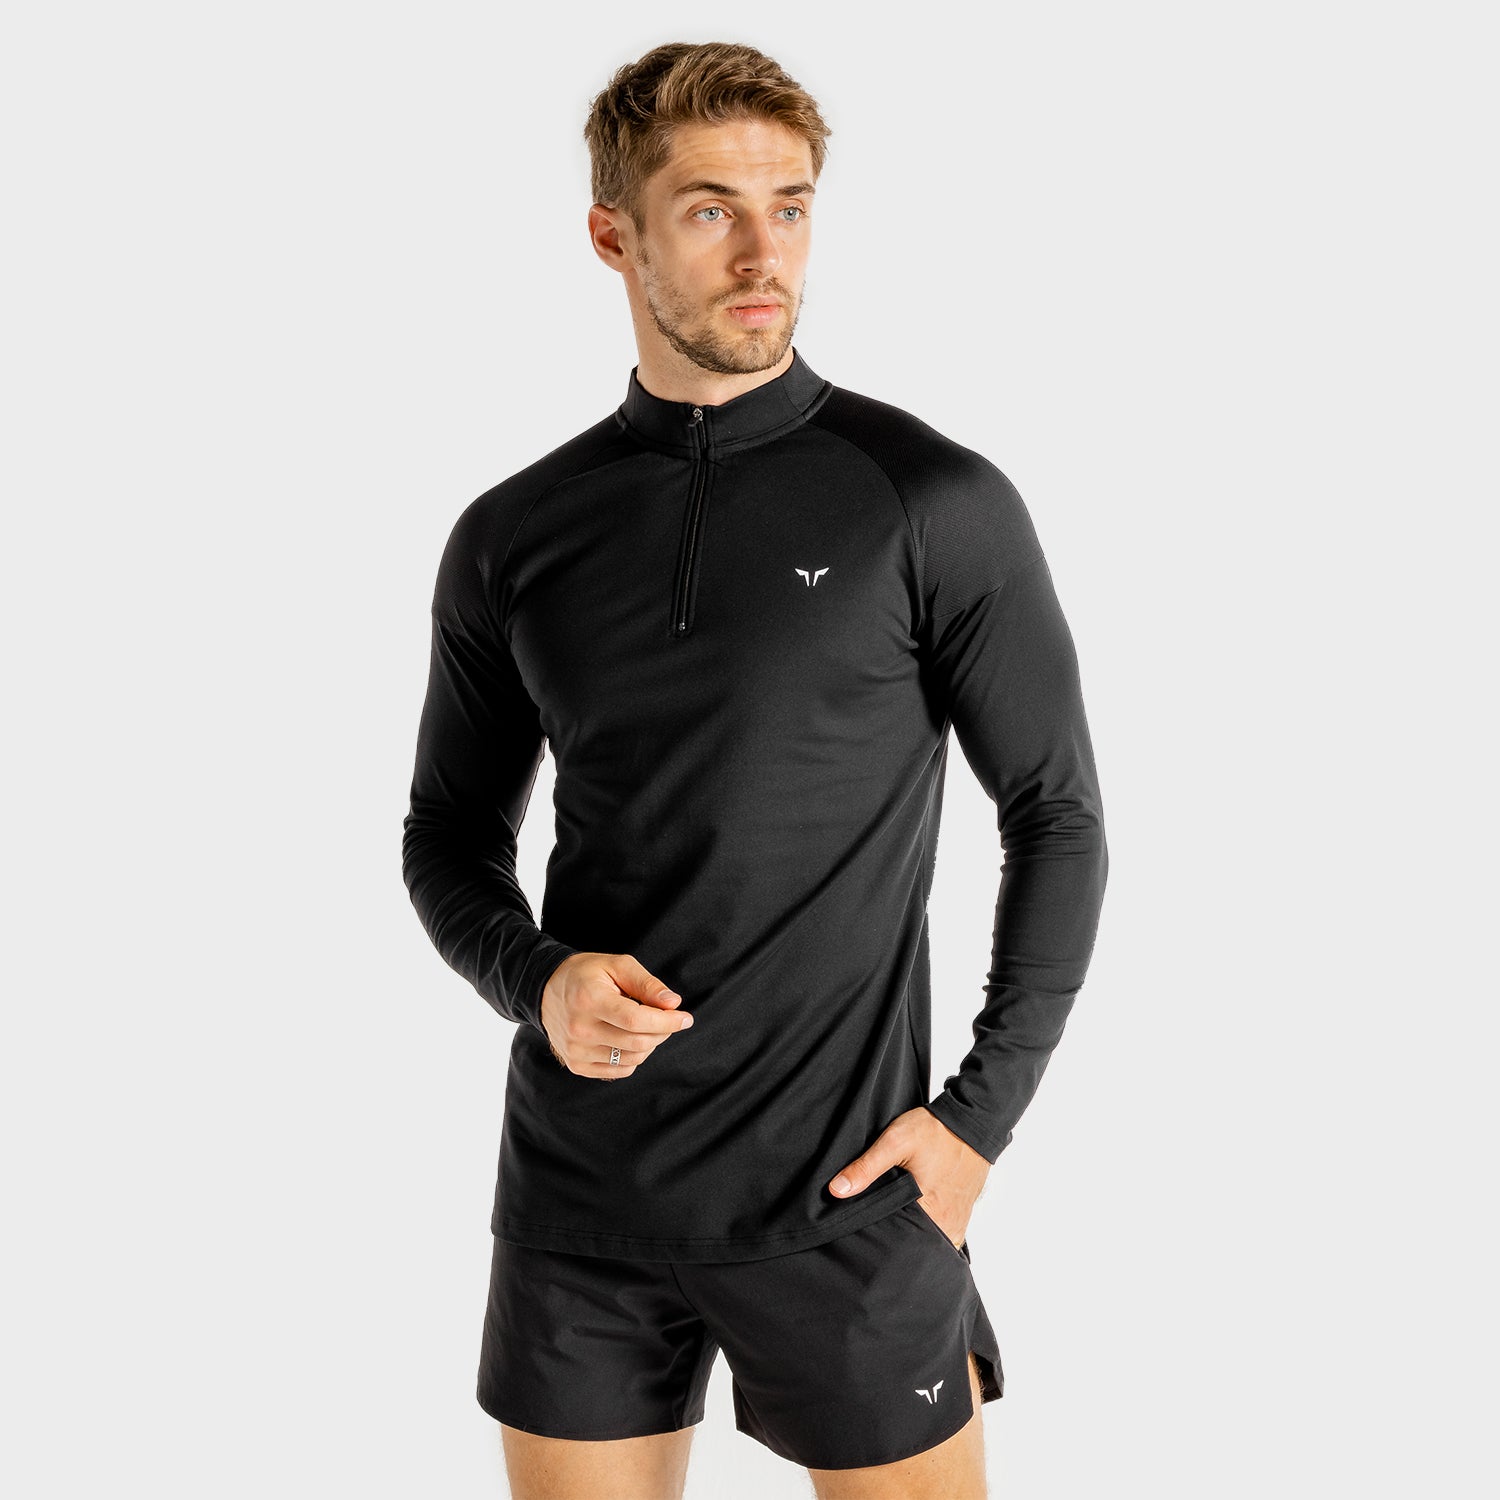 squatwolf-workout-shirts-for-men-core-running-top-black-long-sleeve-gym-wear